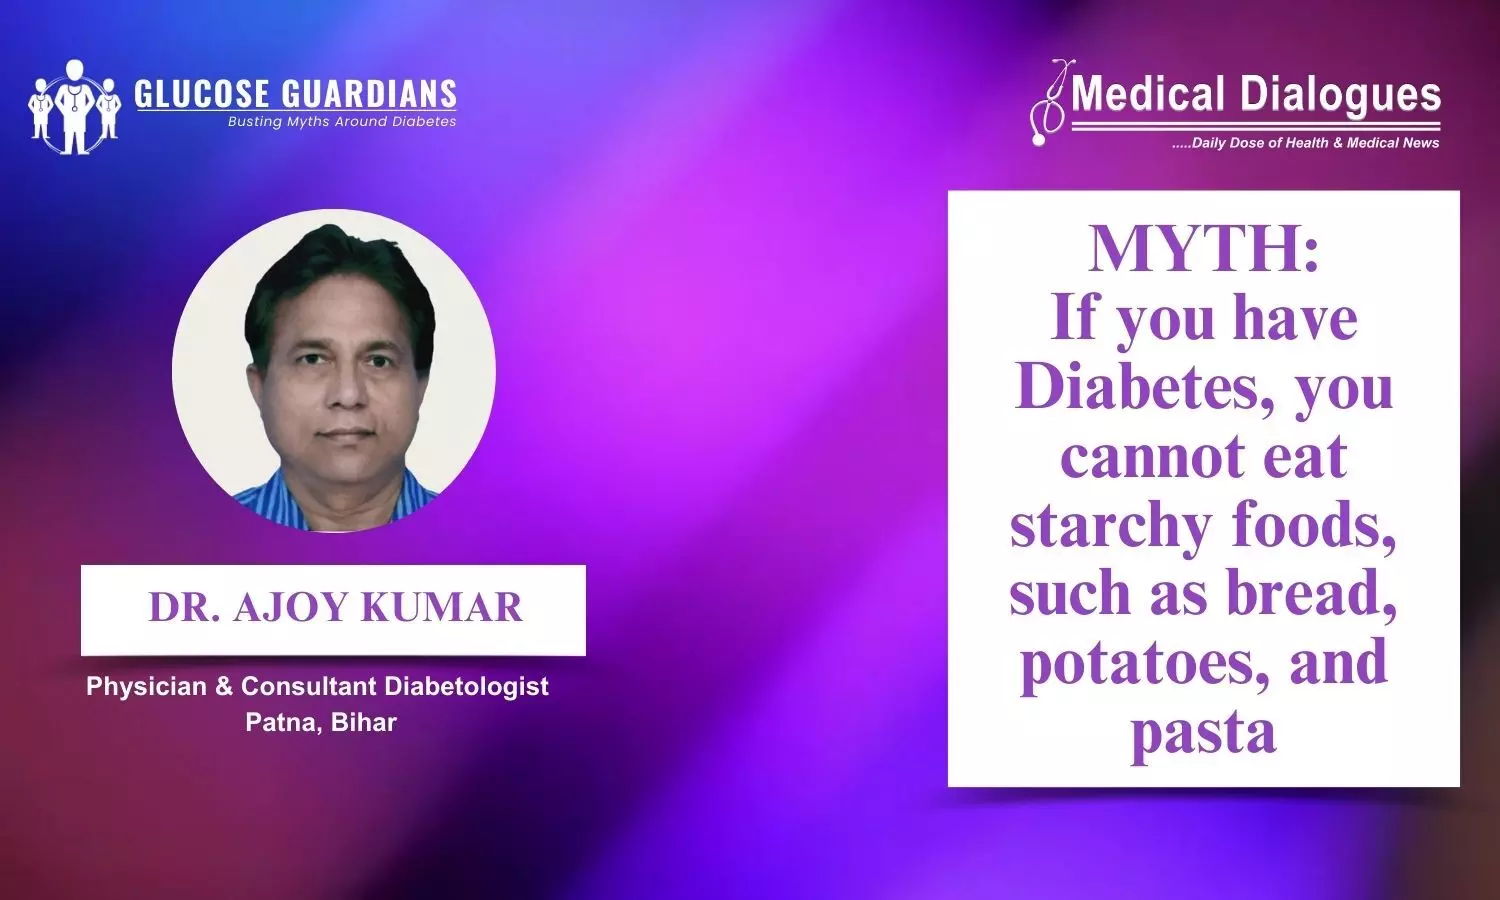 What are the myths related to diabetes and diet? - Dr Ajoy Kumar